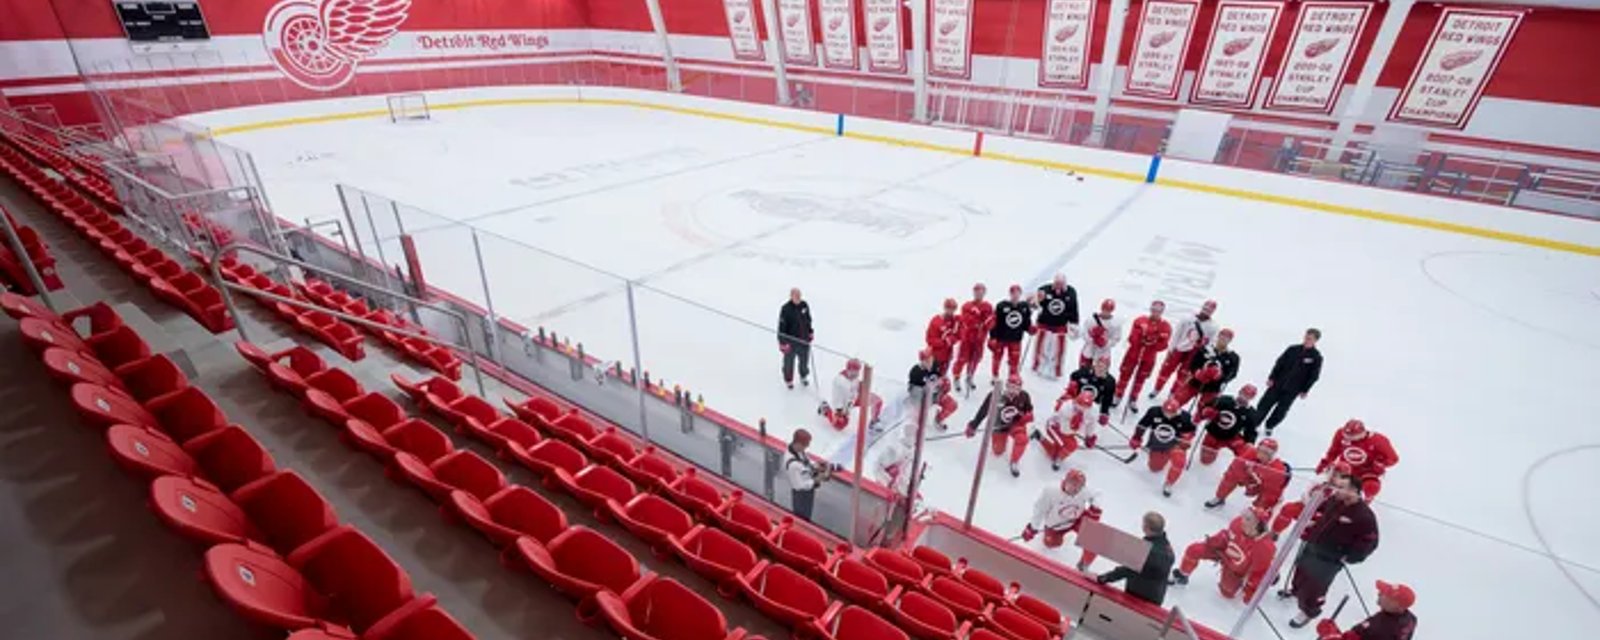 Discouraging news emerges from Red Wings practice 